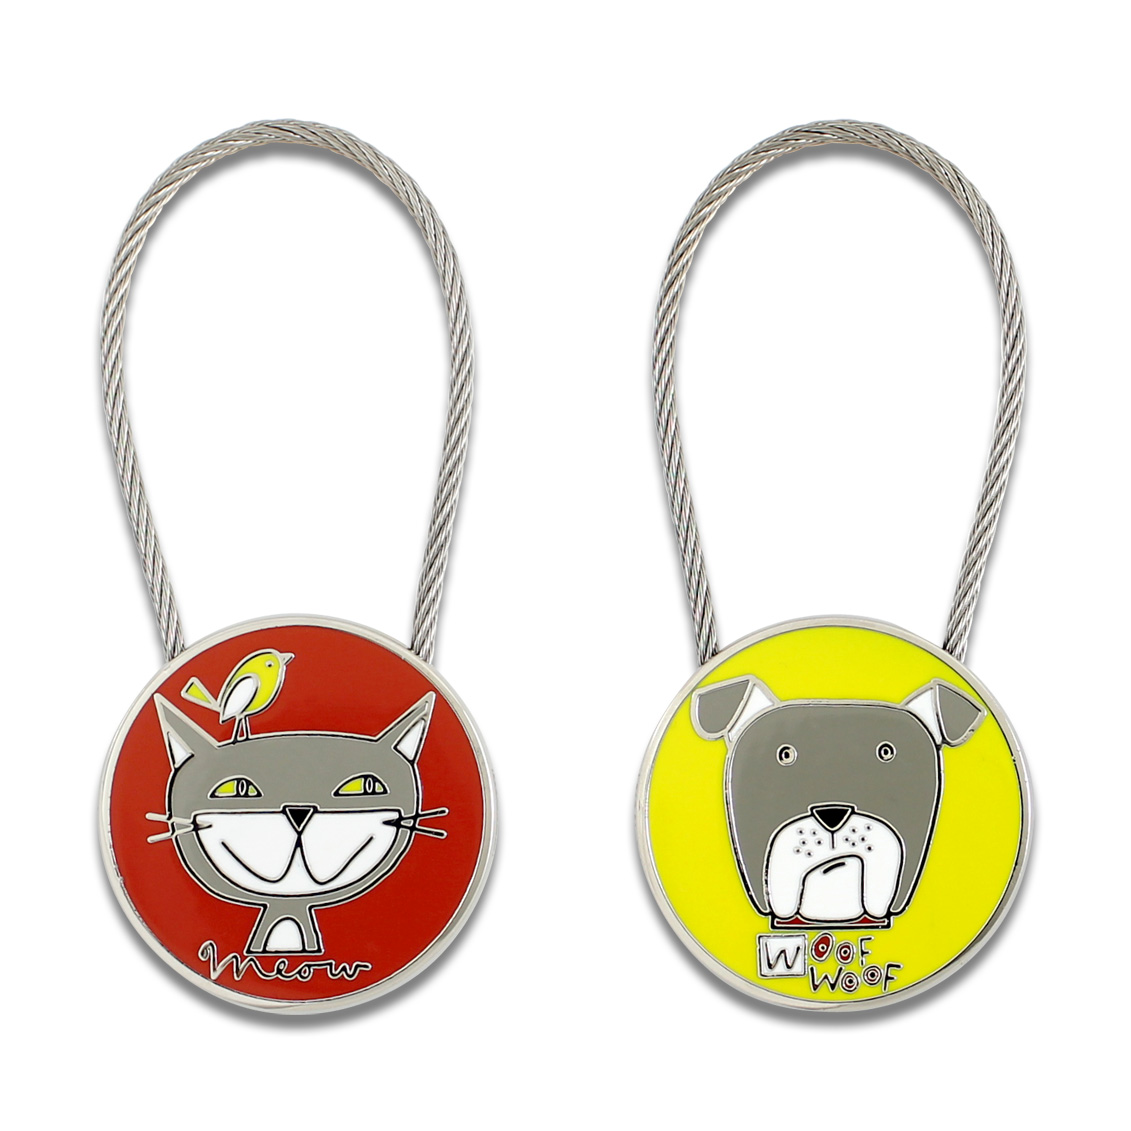 KNW04KR Cats & Dogs Key Ring